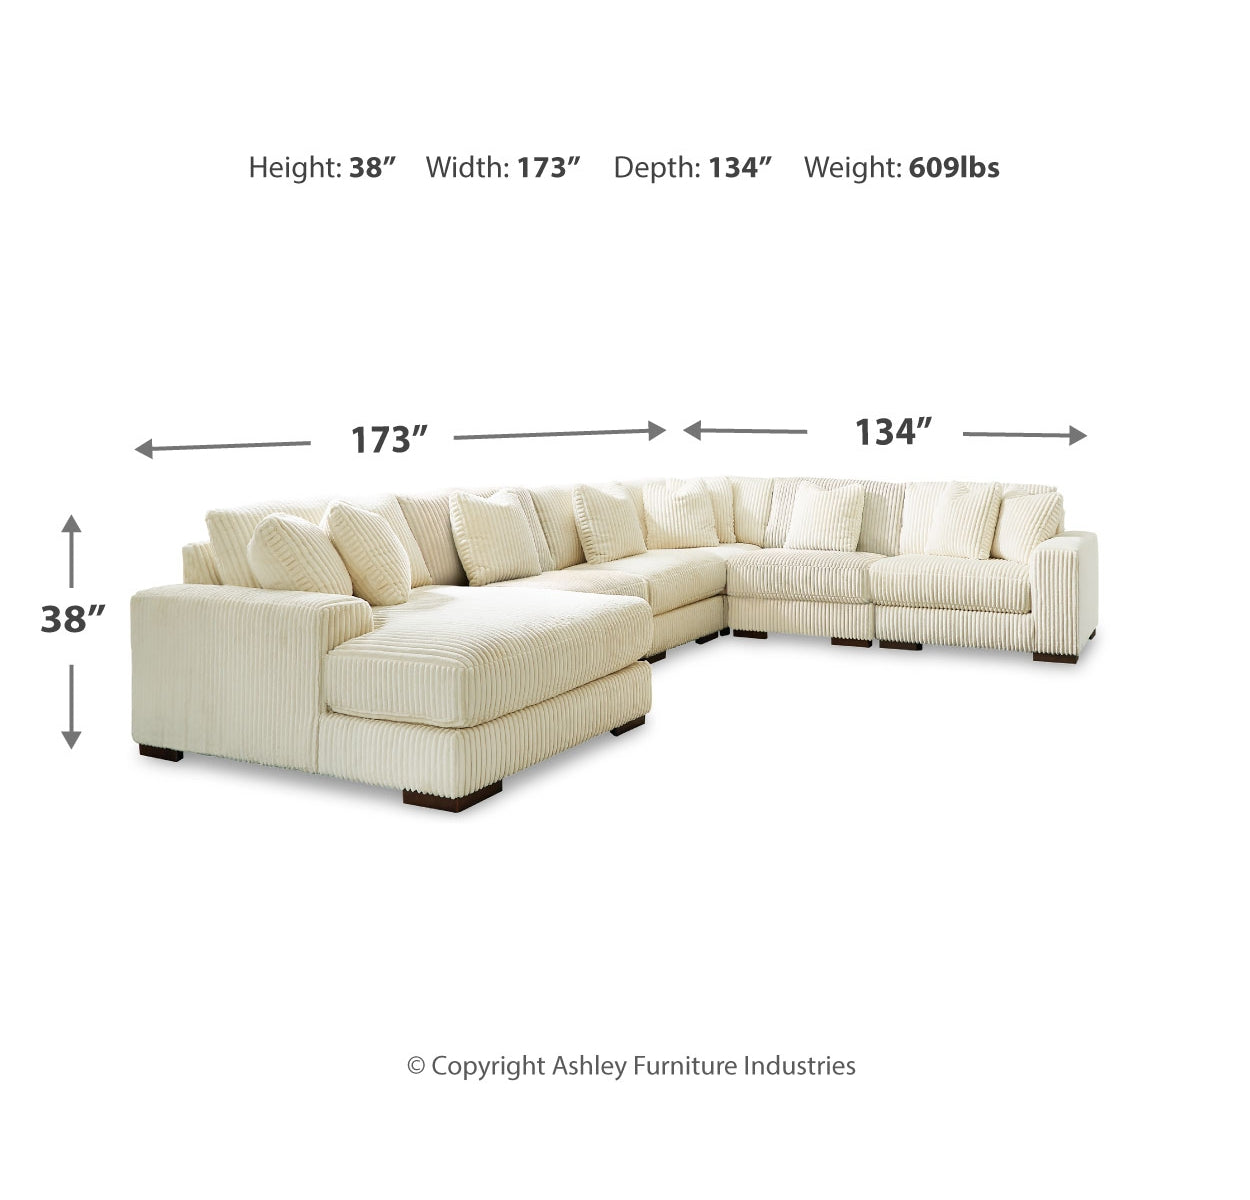 Lindyn 6-Piece Sectional with Ottoman